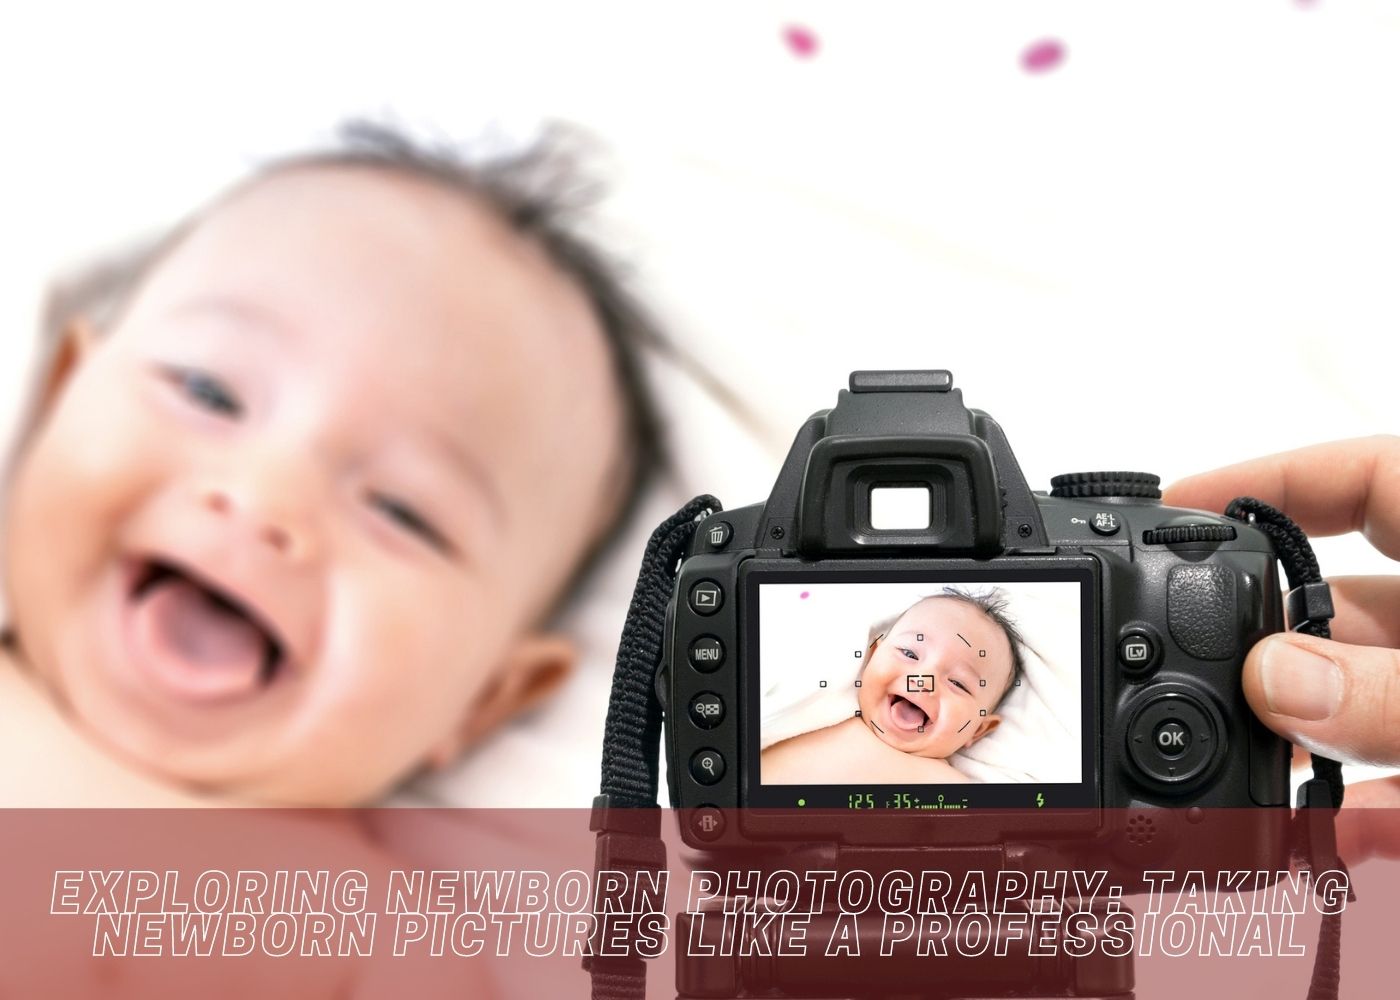 Exploring Newborn Photography: Taking Newborn Pictures like a Professional